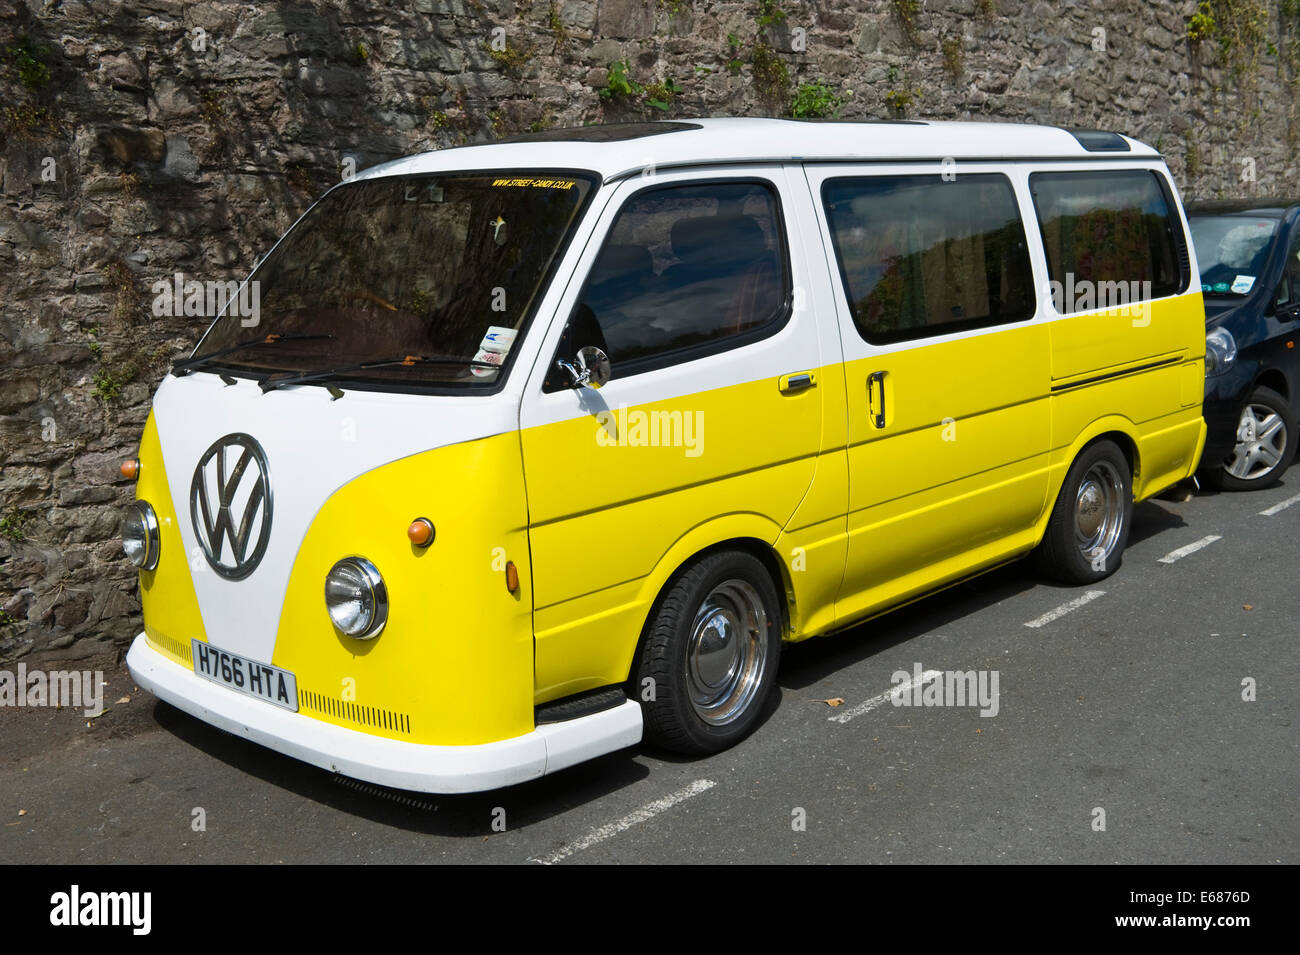 Yellow & white VW camper van parked on the street Brecon Powys Wales UK  Stock Photo - Alamy